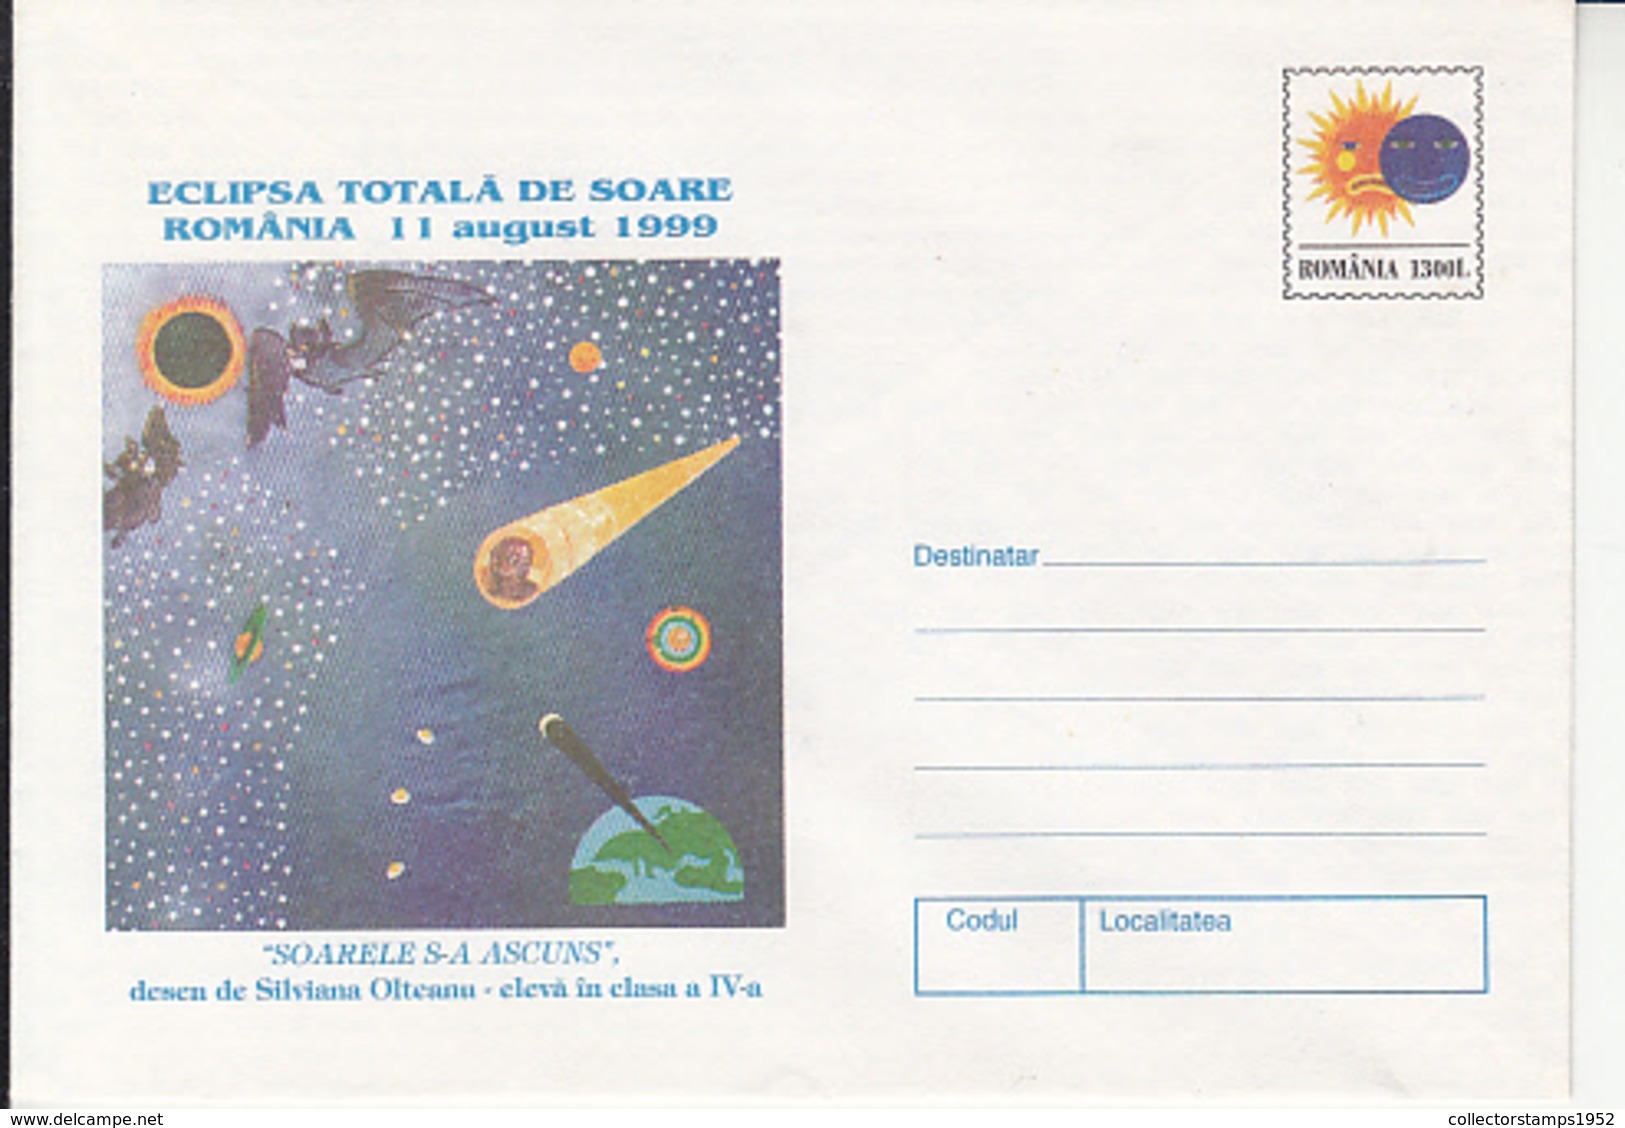 89371- TOTAL SOLAR ECLIPSE, ASTRONOMY, SCIENCE, COVER STATIONERY, 1999, ROMANIA - Astronomy